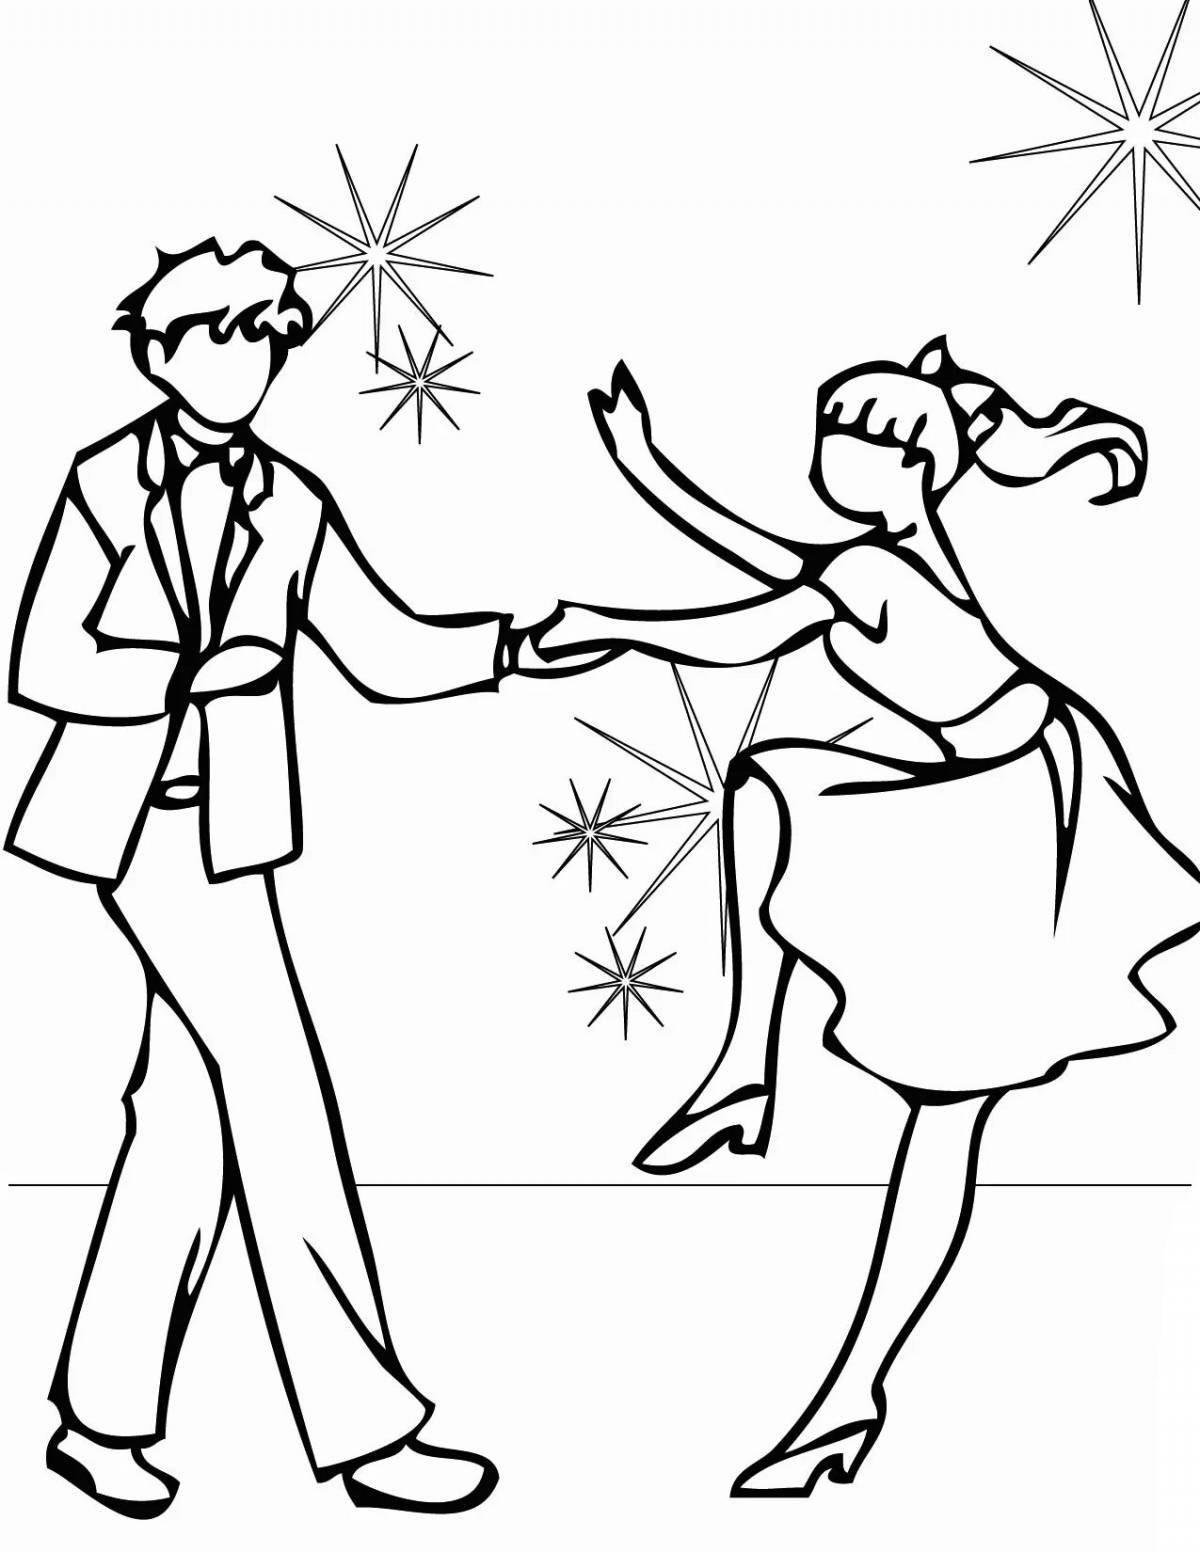 Coloring page mesmerizing dance